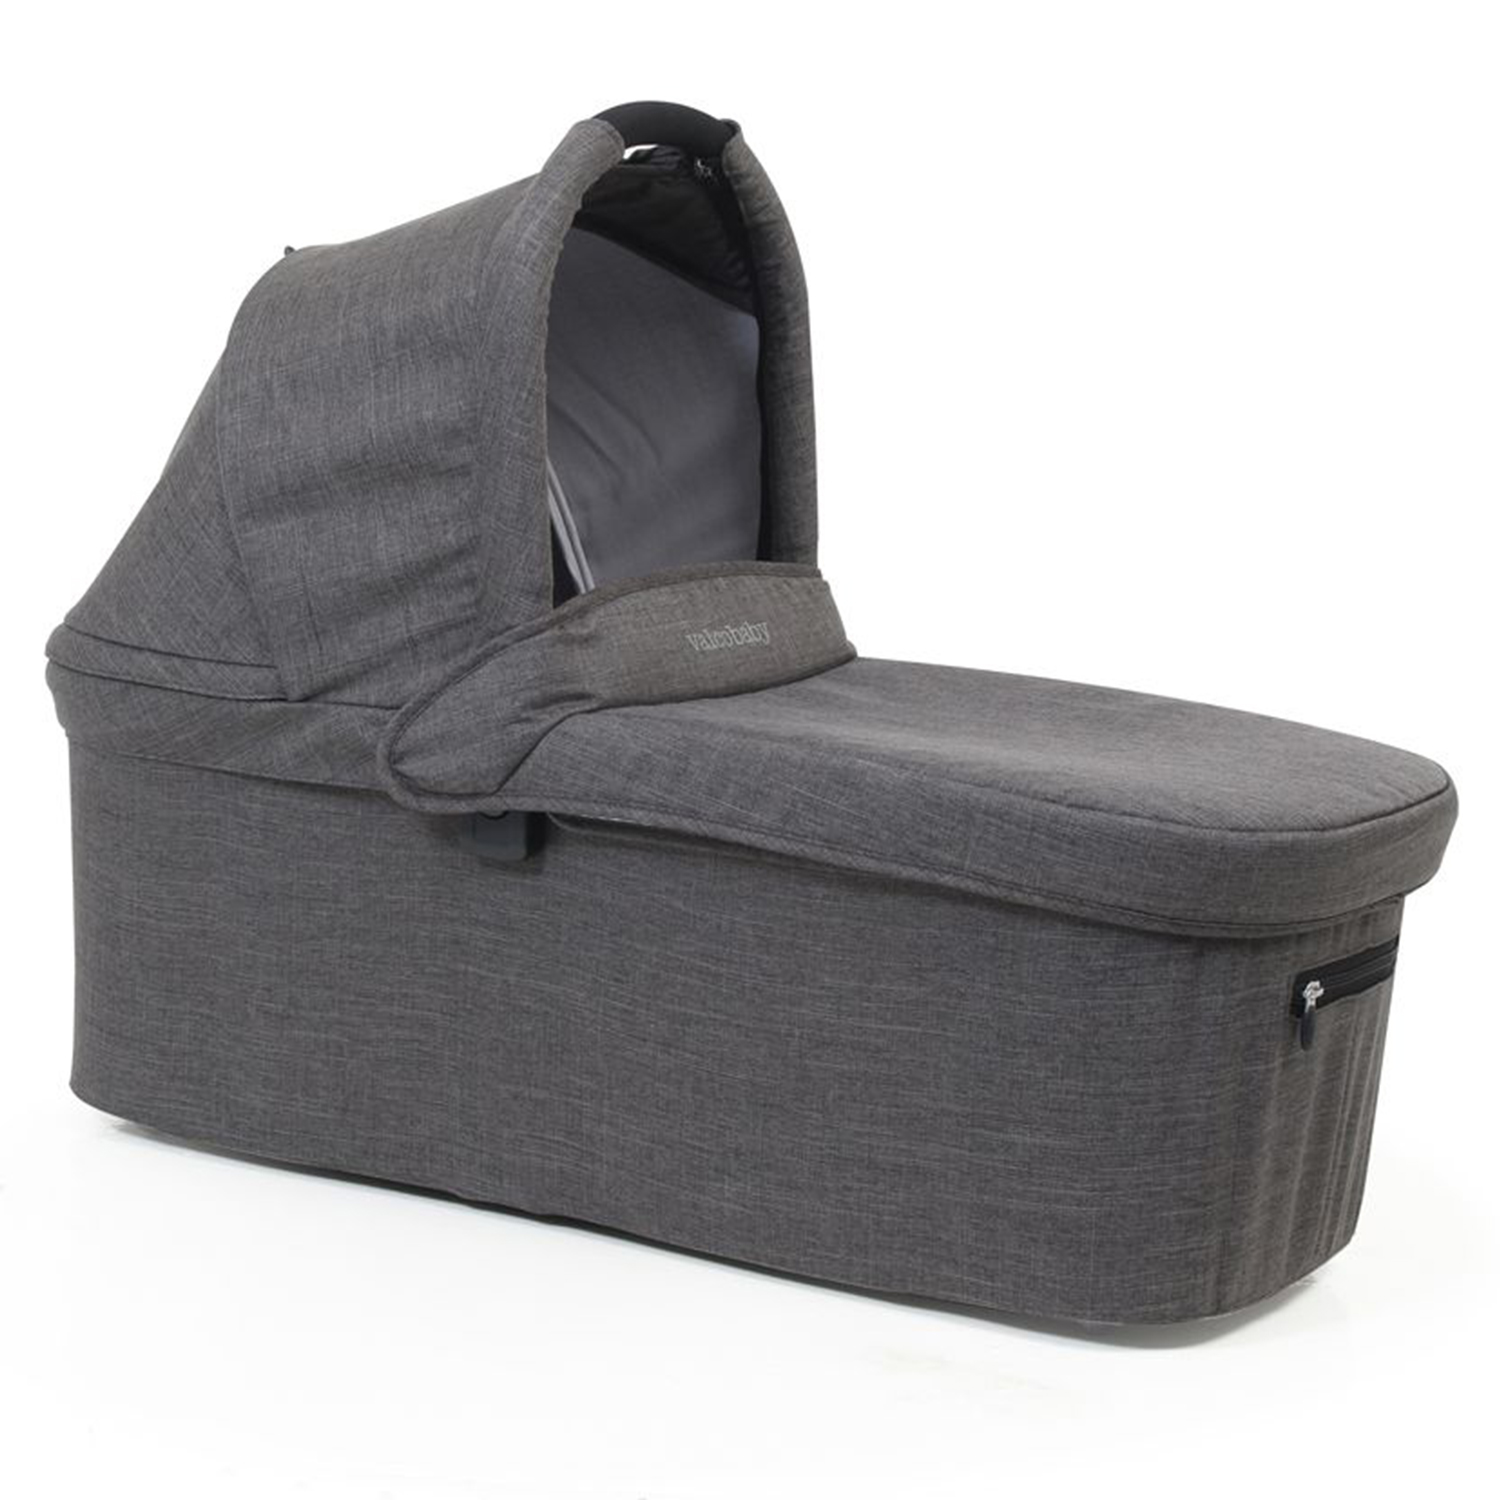 Люлька External Bassinet для Snap Duo Trend / Charcoal Valco Baby люлька valco baby external bassinet grey marle для snap trend snap 4 trend ultra trend